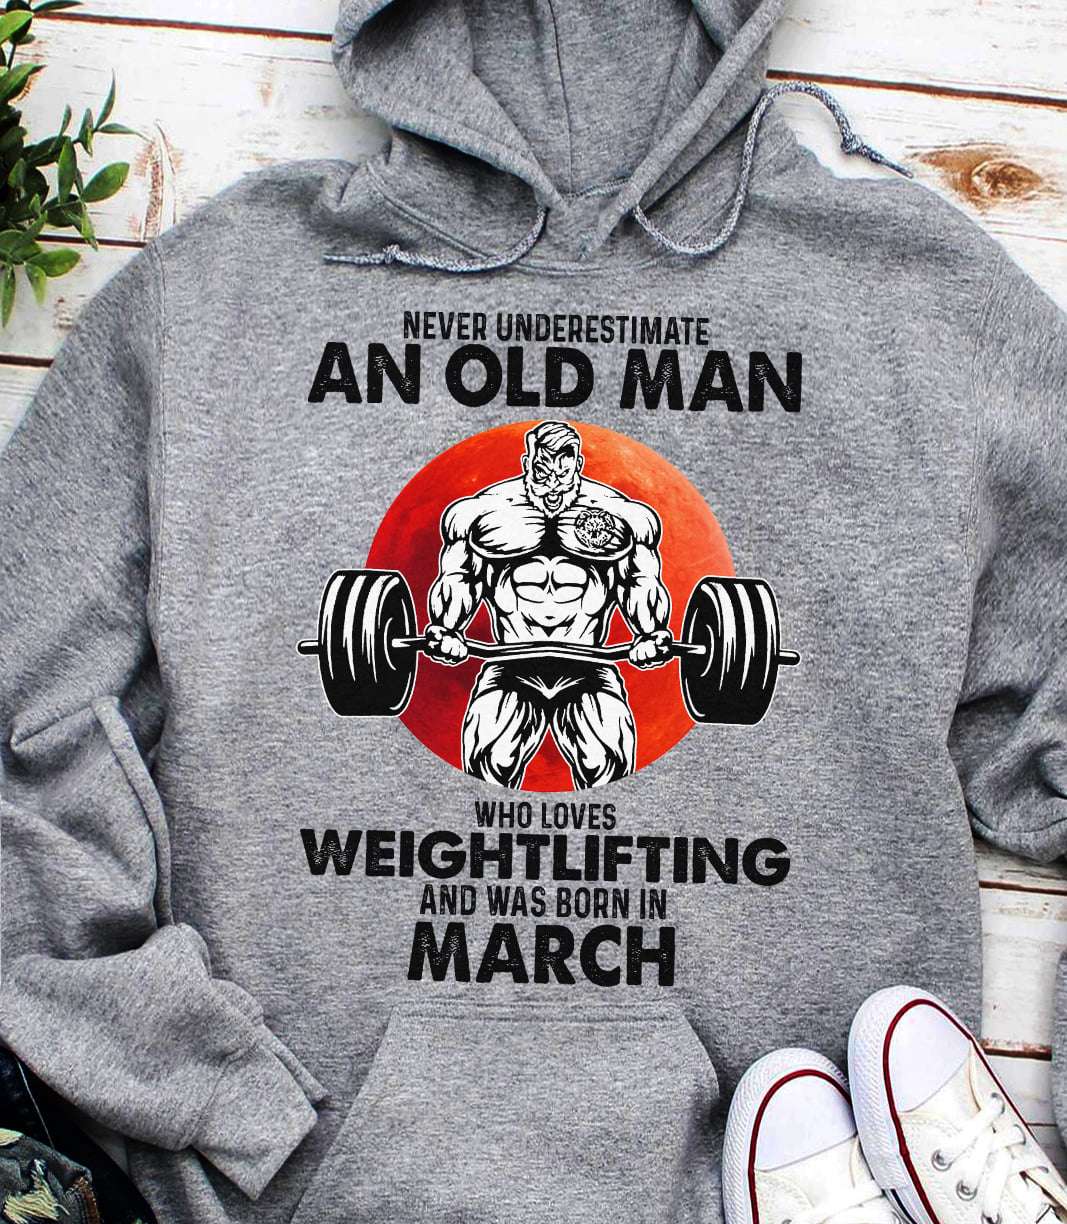 Never underestimate an old man who loves weighlifting and was born in March - Strong bodybuilder